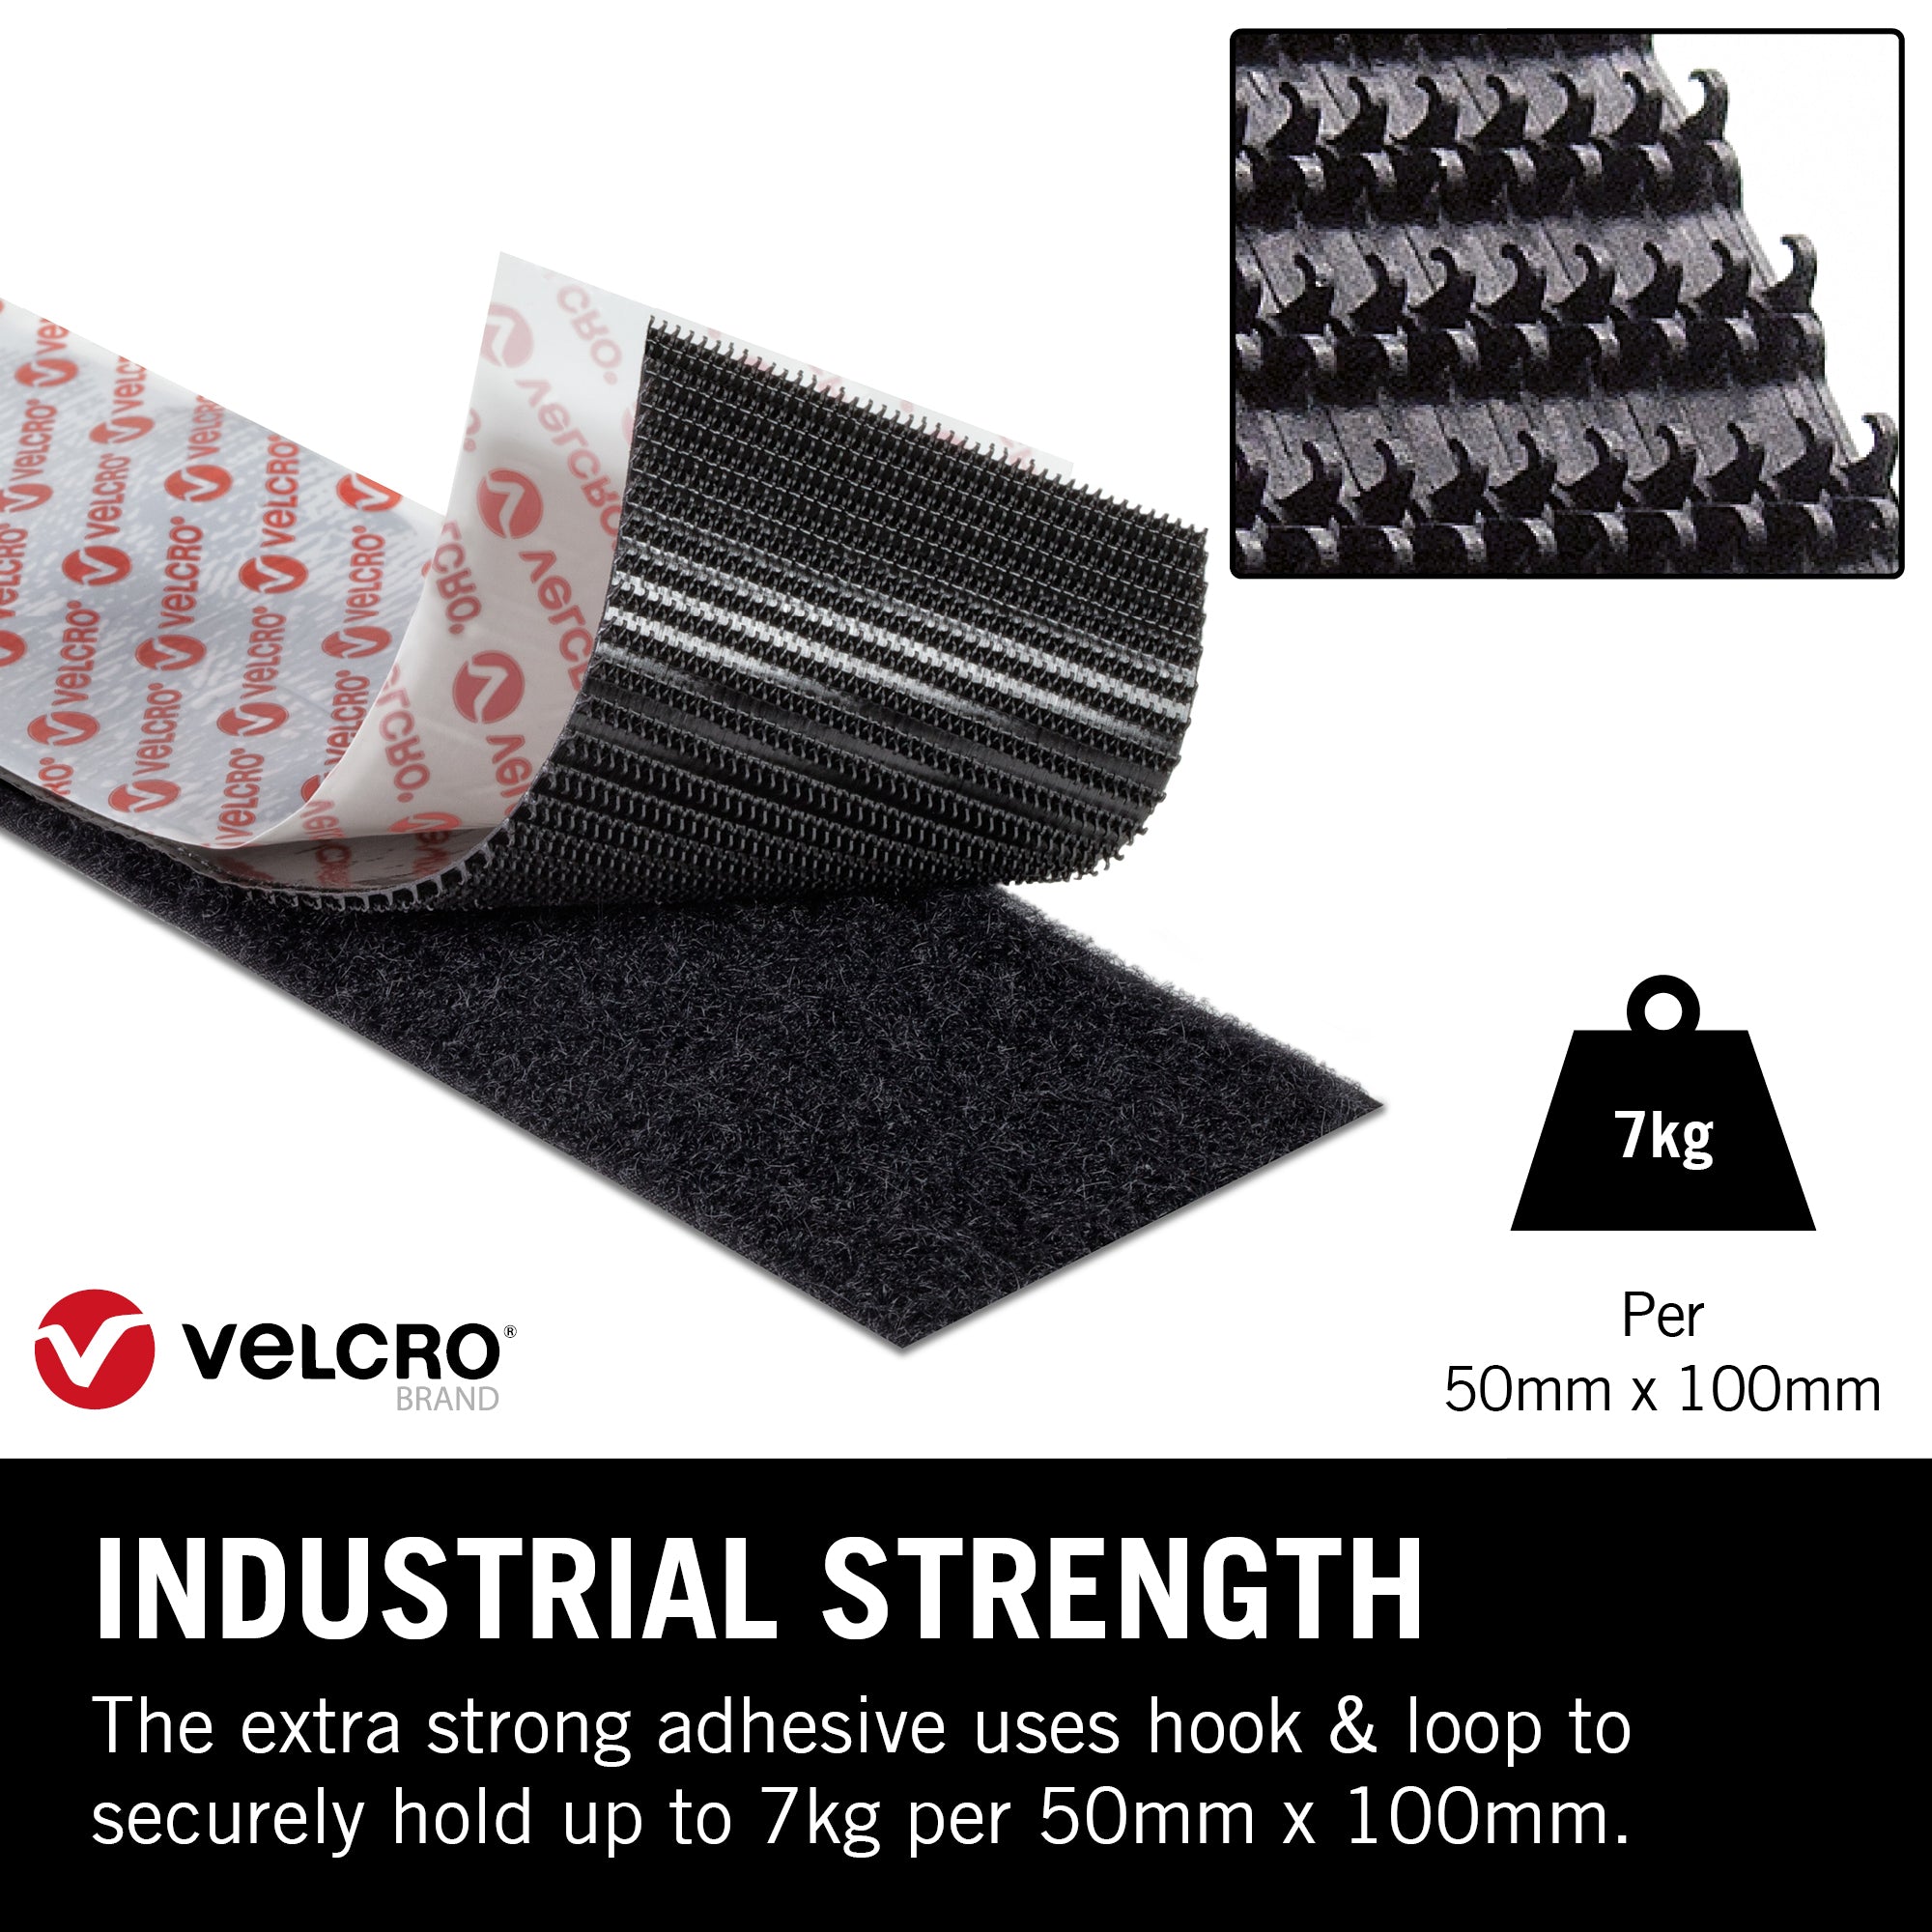 Adhesive VELCRO Brand Industrial Strength Tape Strips Heavy Duty